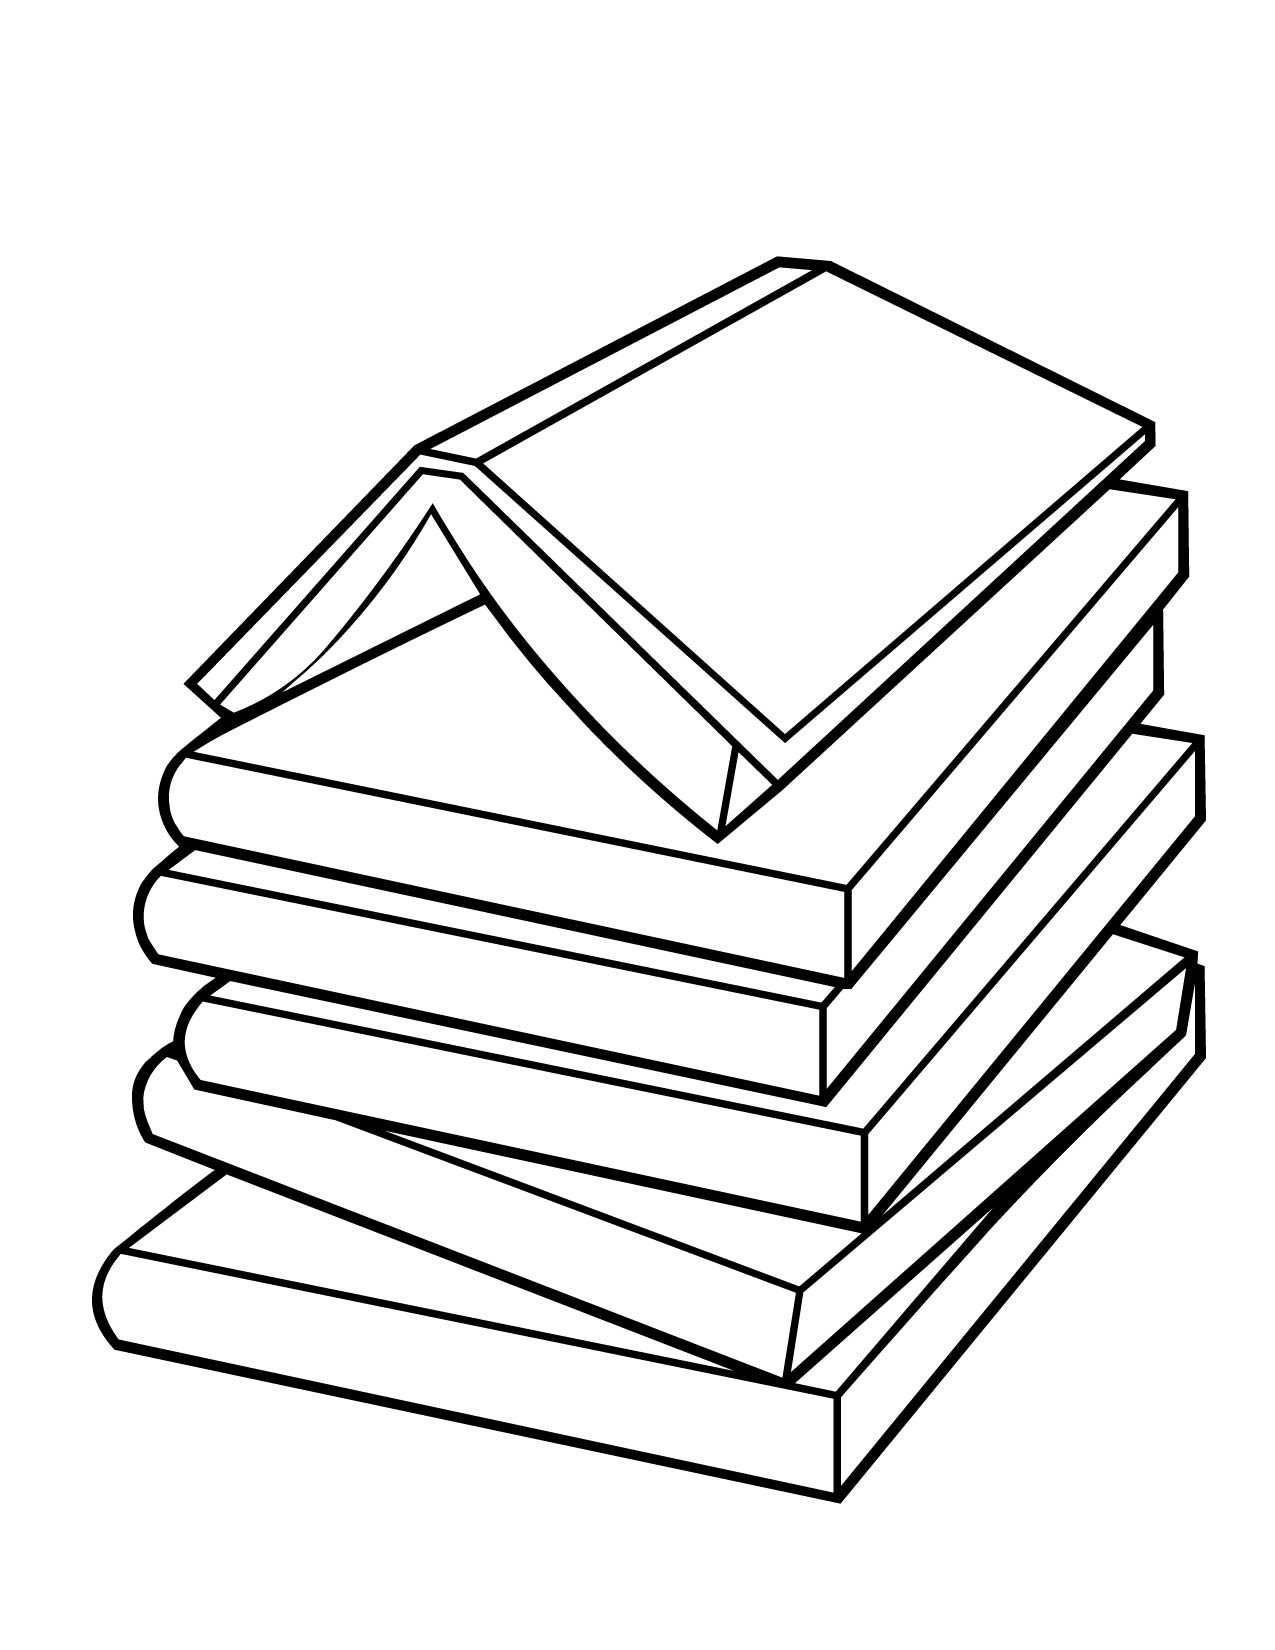 Bookss Coloring Pages   Coloring Cool